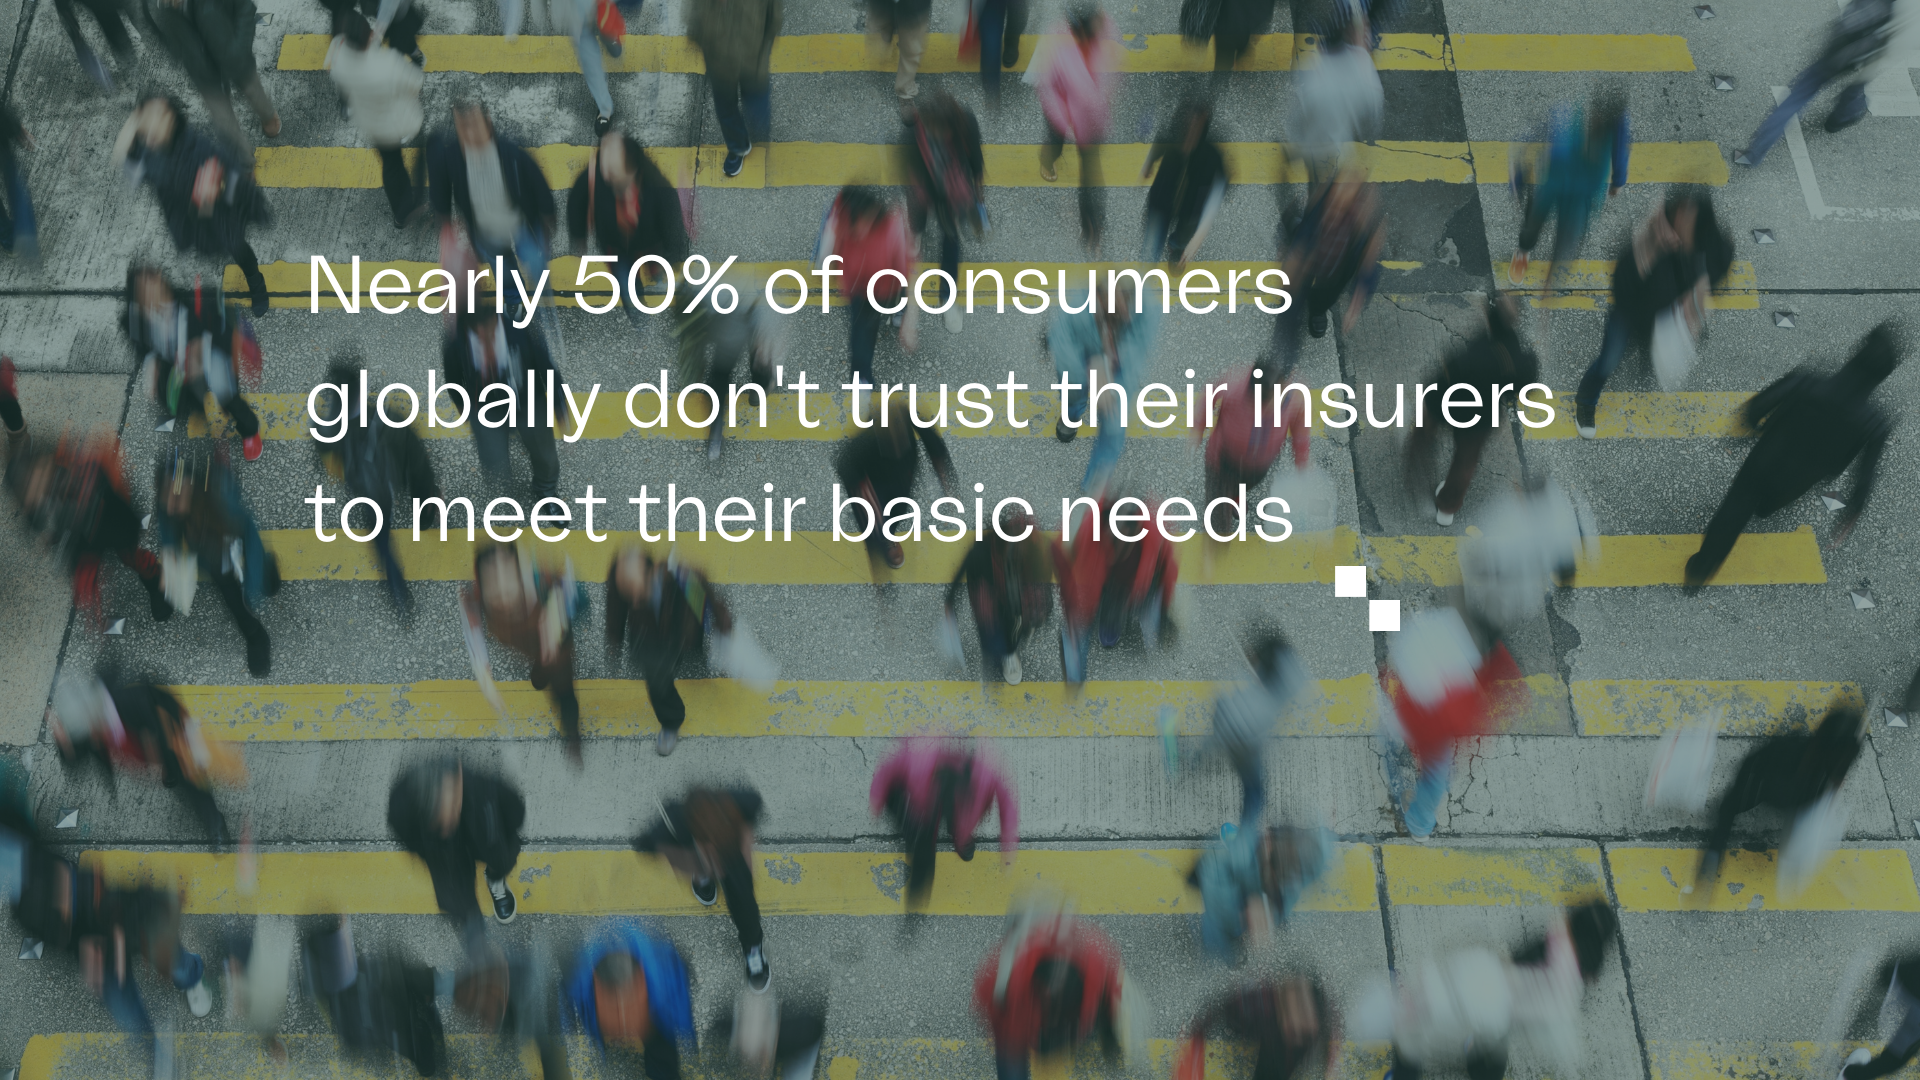 What are consumers looking for in insurance in 2022?